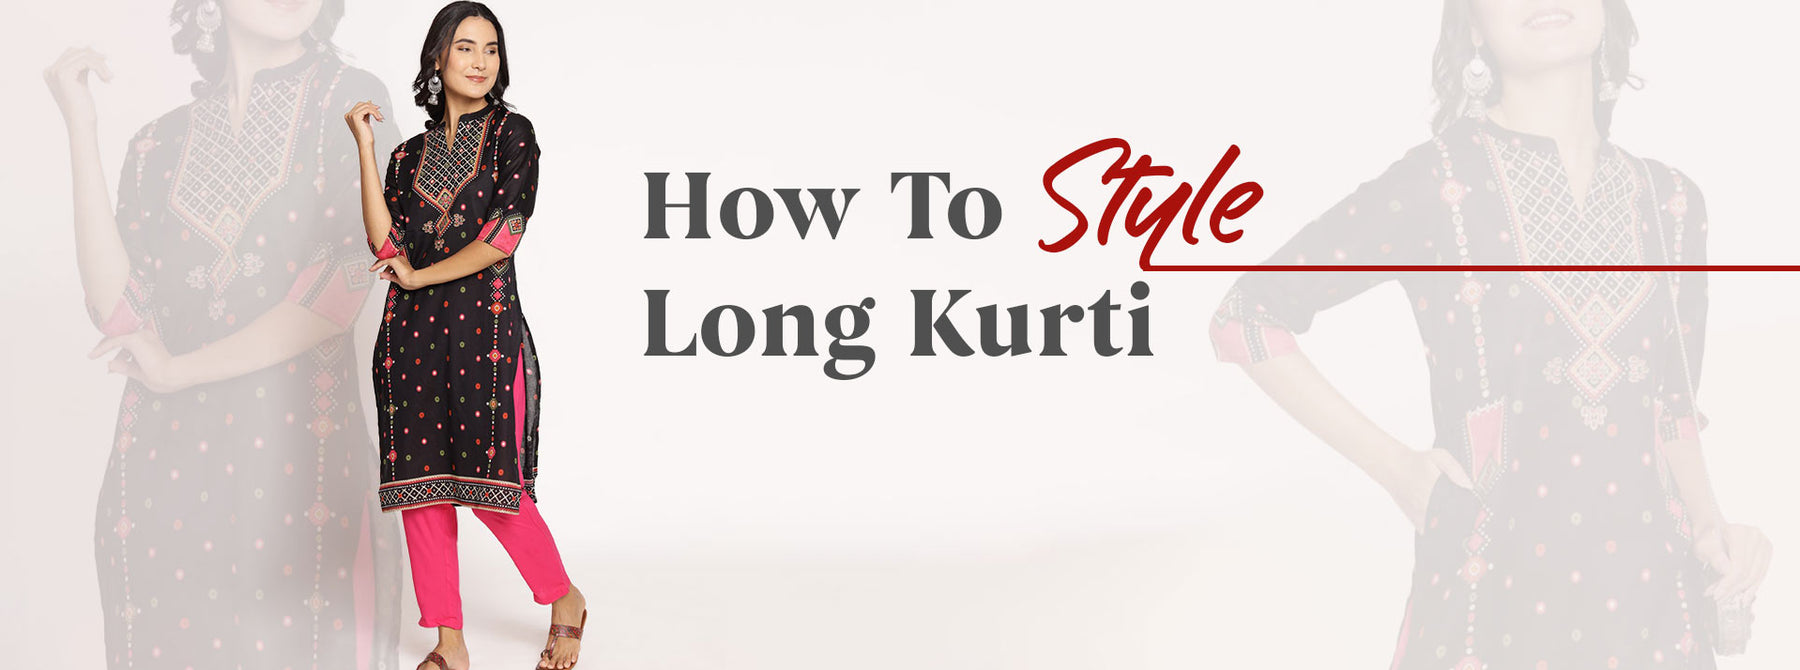 How To Style a Long Kurti?